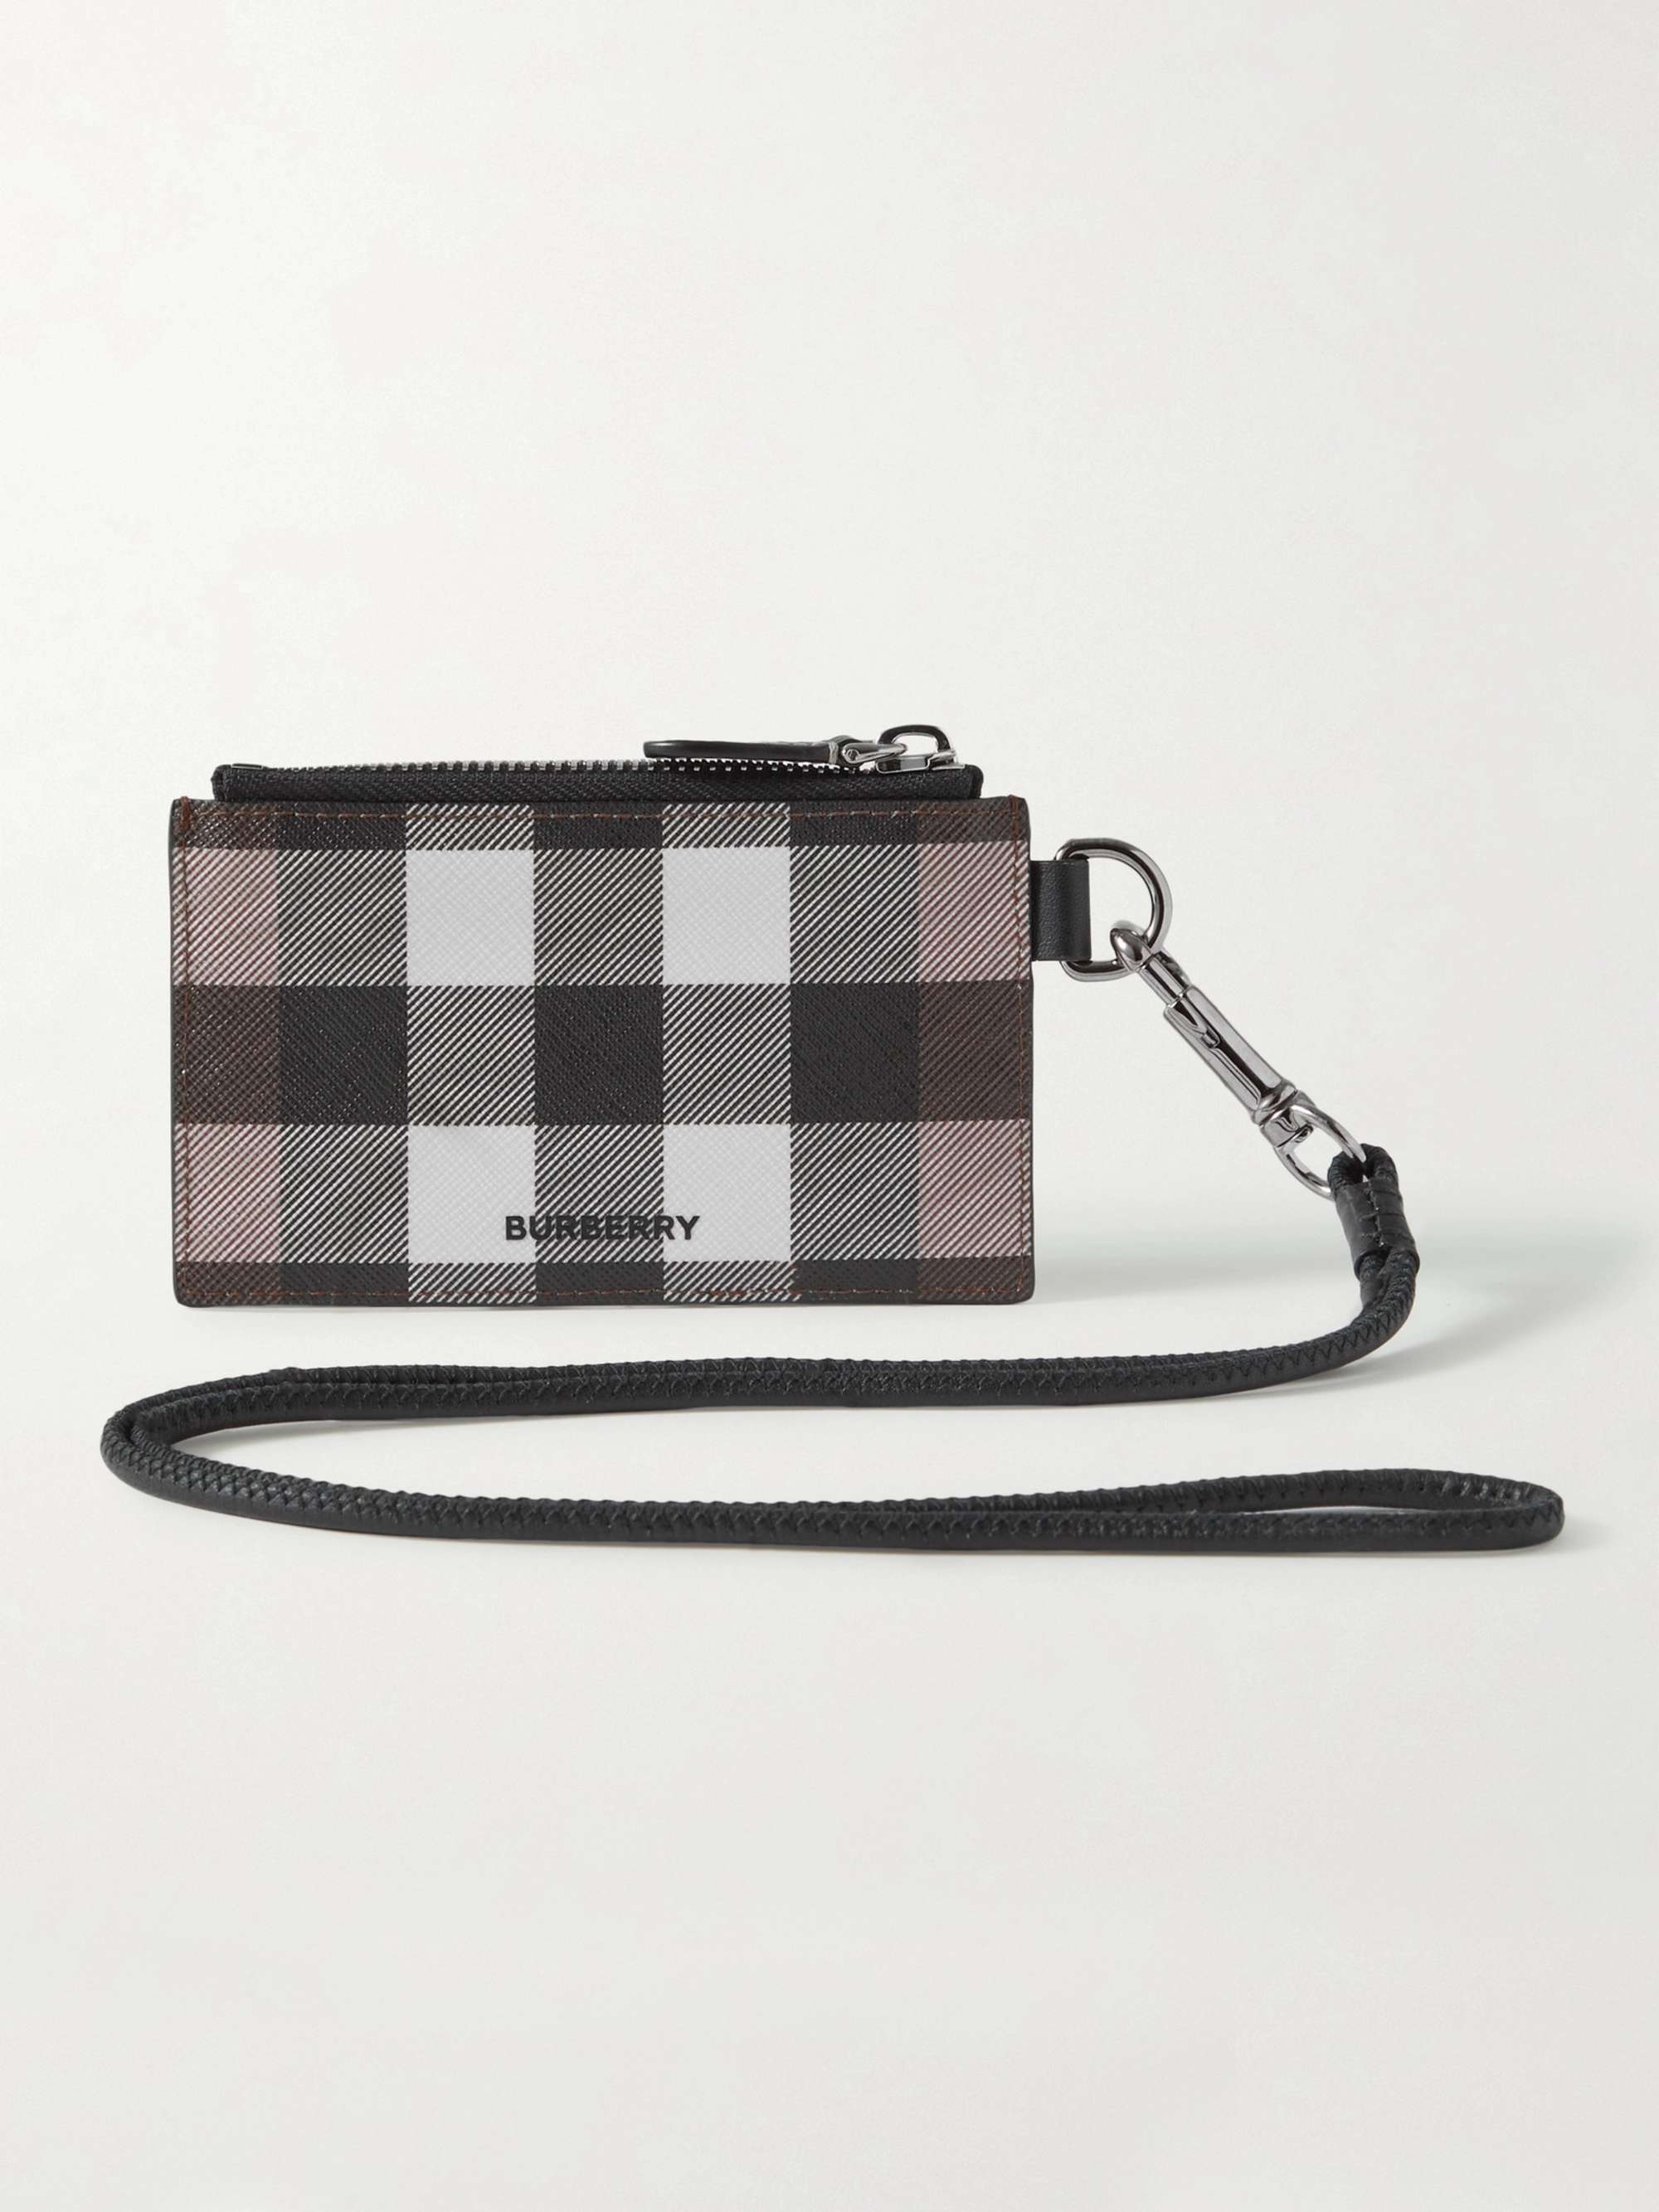 BURBERRY Leather-Trimmed Checked E-Canvas Cardholder with Lanyard